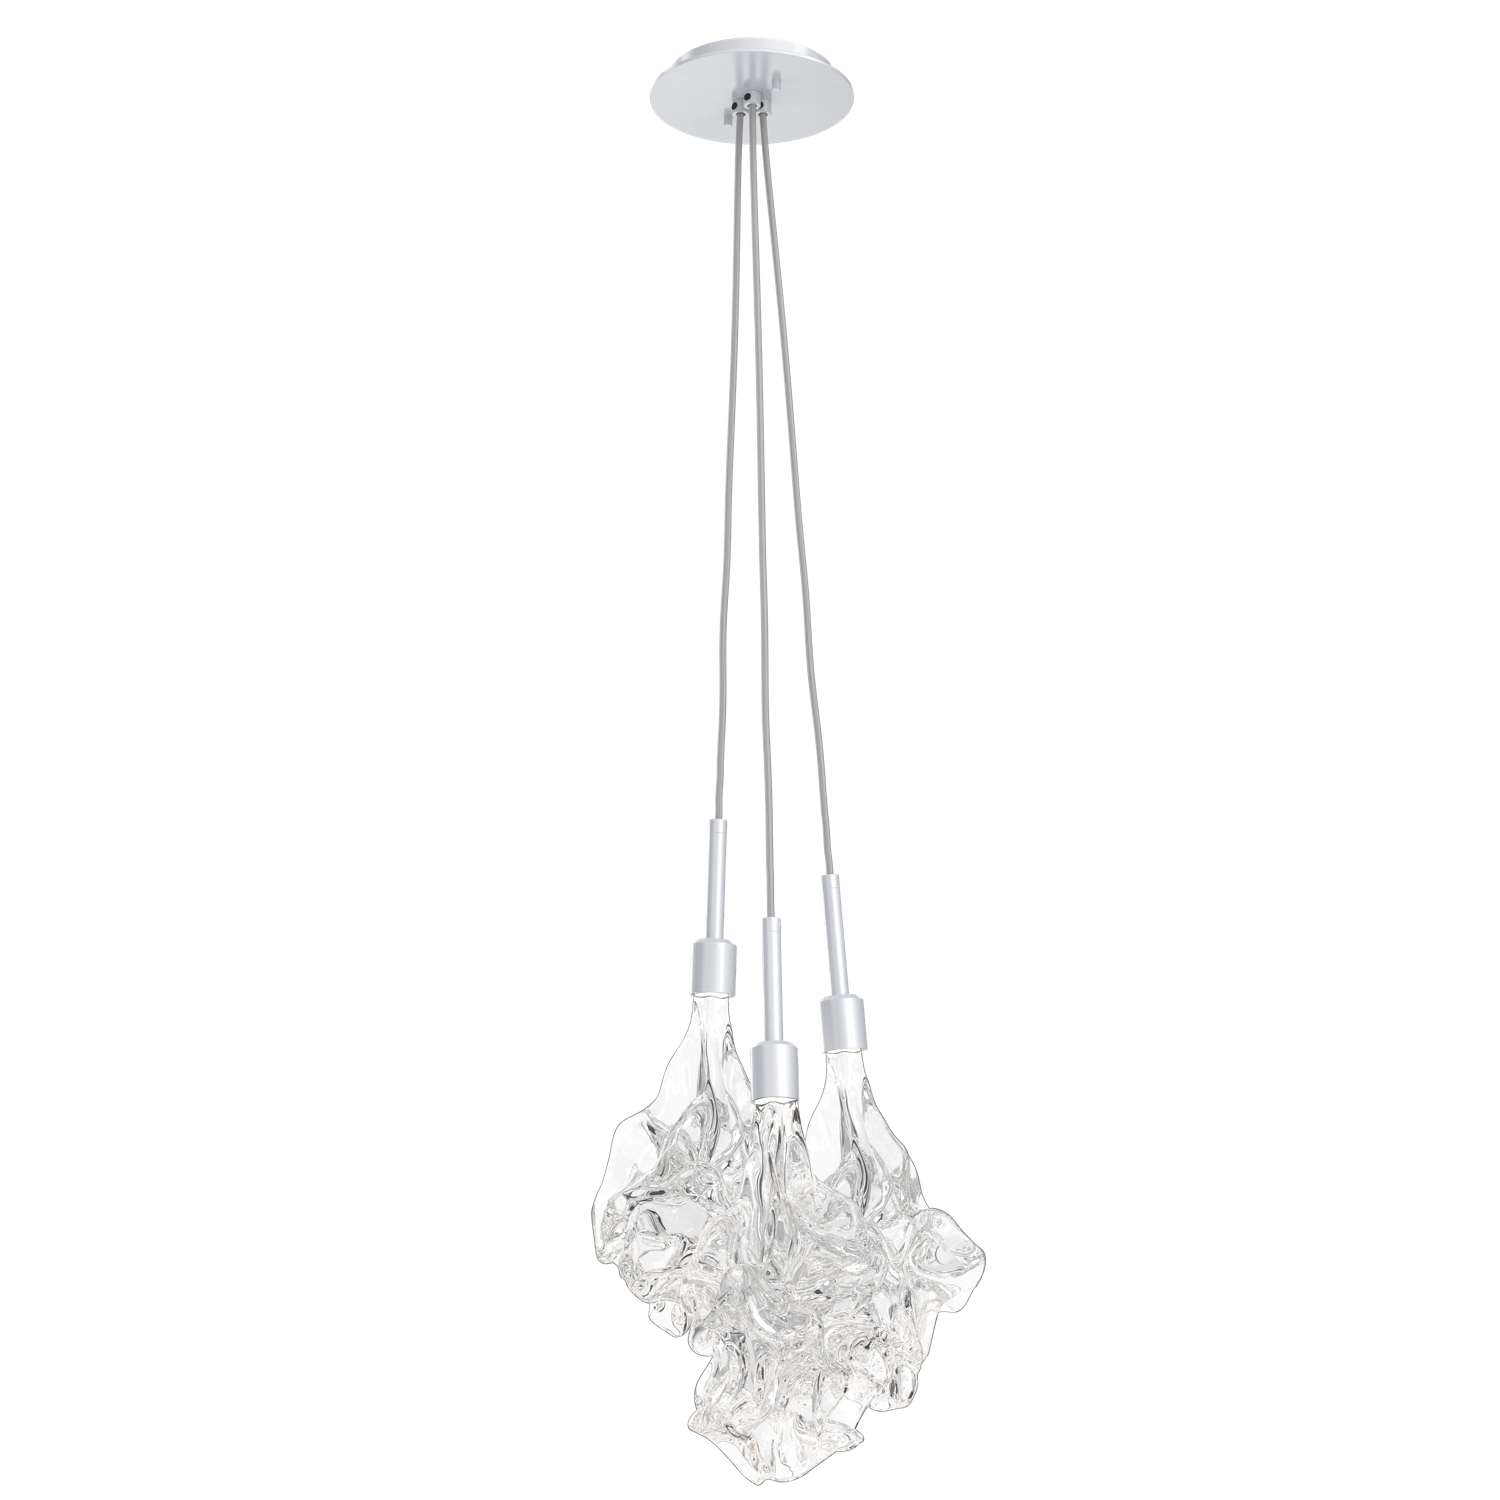 LAB0059-0A-CS-Hammerton-Studio-Blossom-3-light-cluster-pendant-light-with-classic-silver-finish-and-clear-handblown-crystal-glass-shades-and-LED-lamping